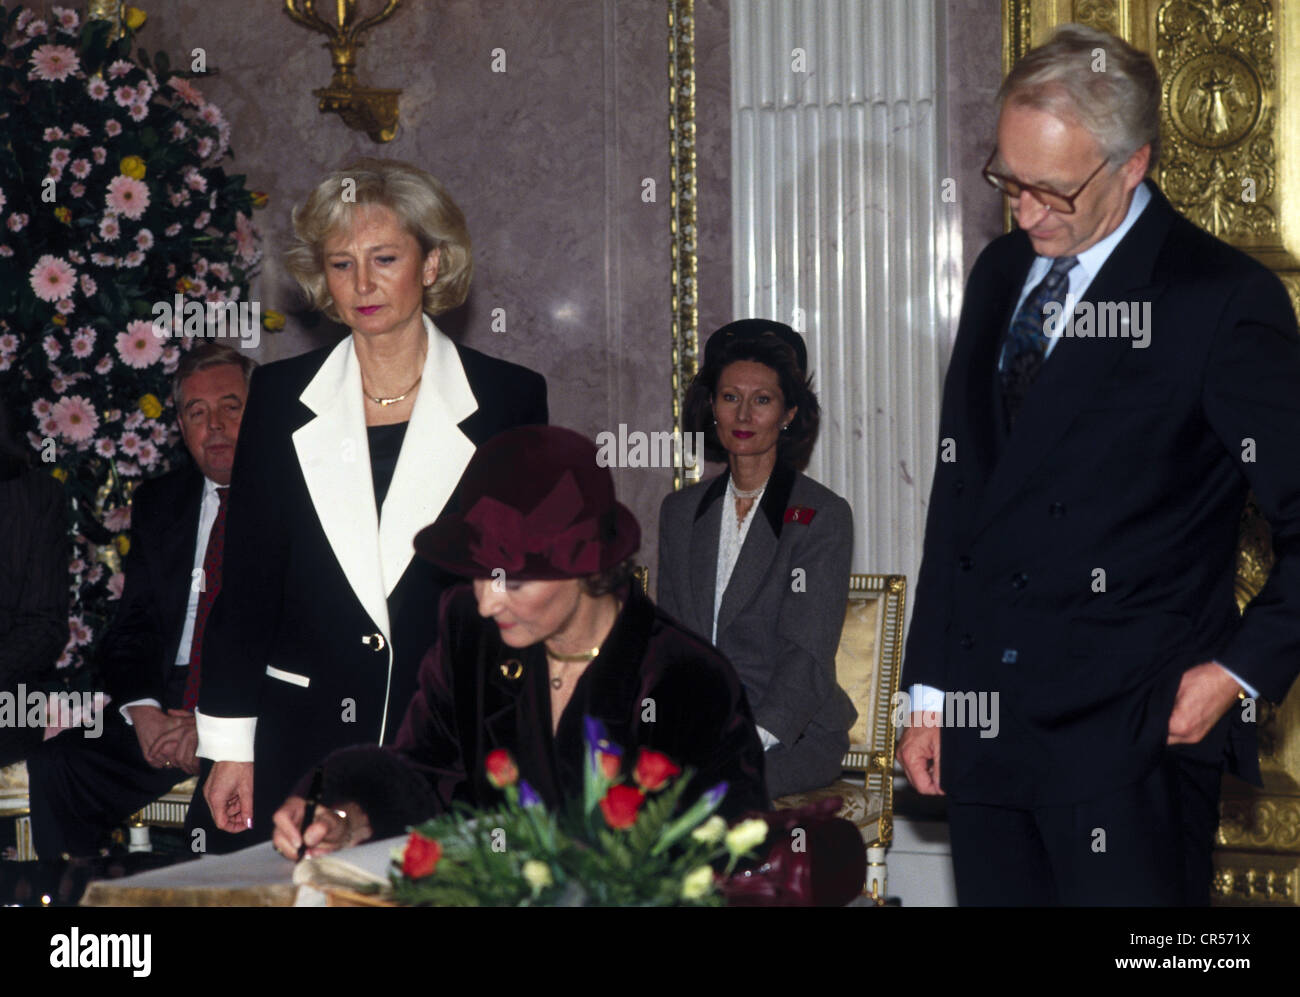 Sonja, * 4.7.1937, Queen of Norway since 17.1.1991, state visit to Germany, with Prime Minster of Bavaria Edmund Stoiber and hist wife Katrin, State Chancellory, Munich, 1993, Stock Photo